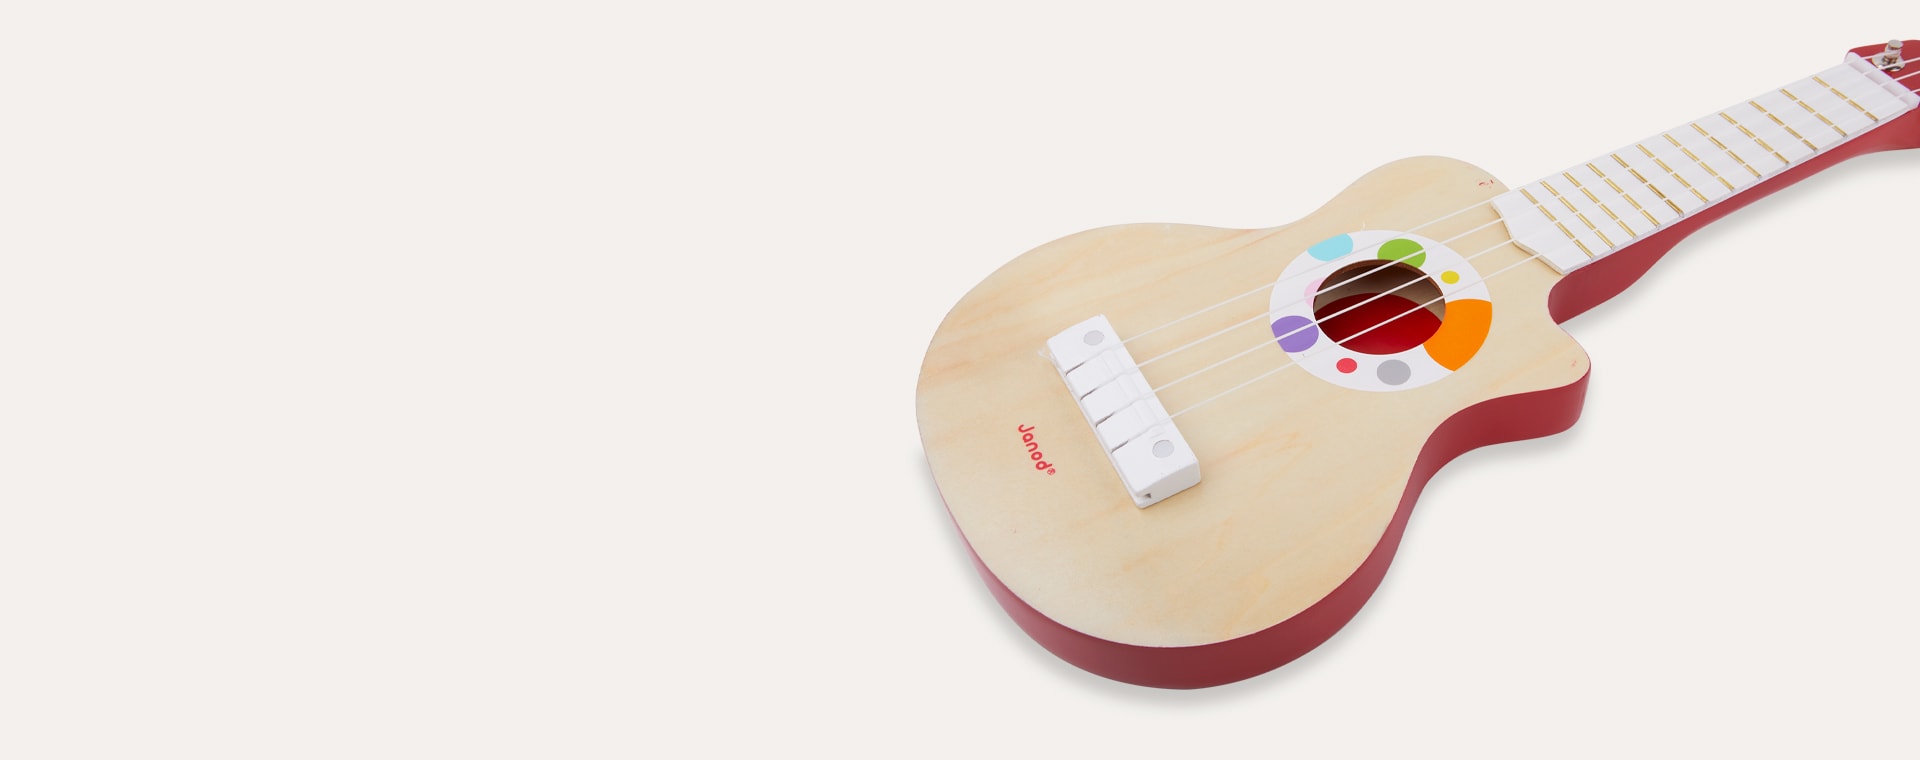 Buy the Janod Confetti Rock Guitar at KIDLY UK